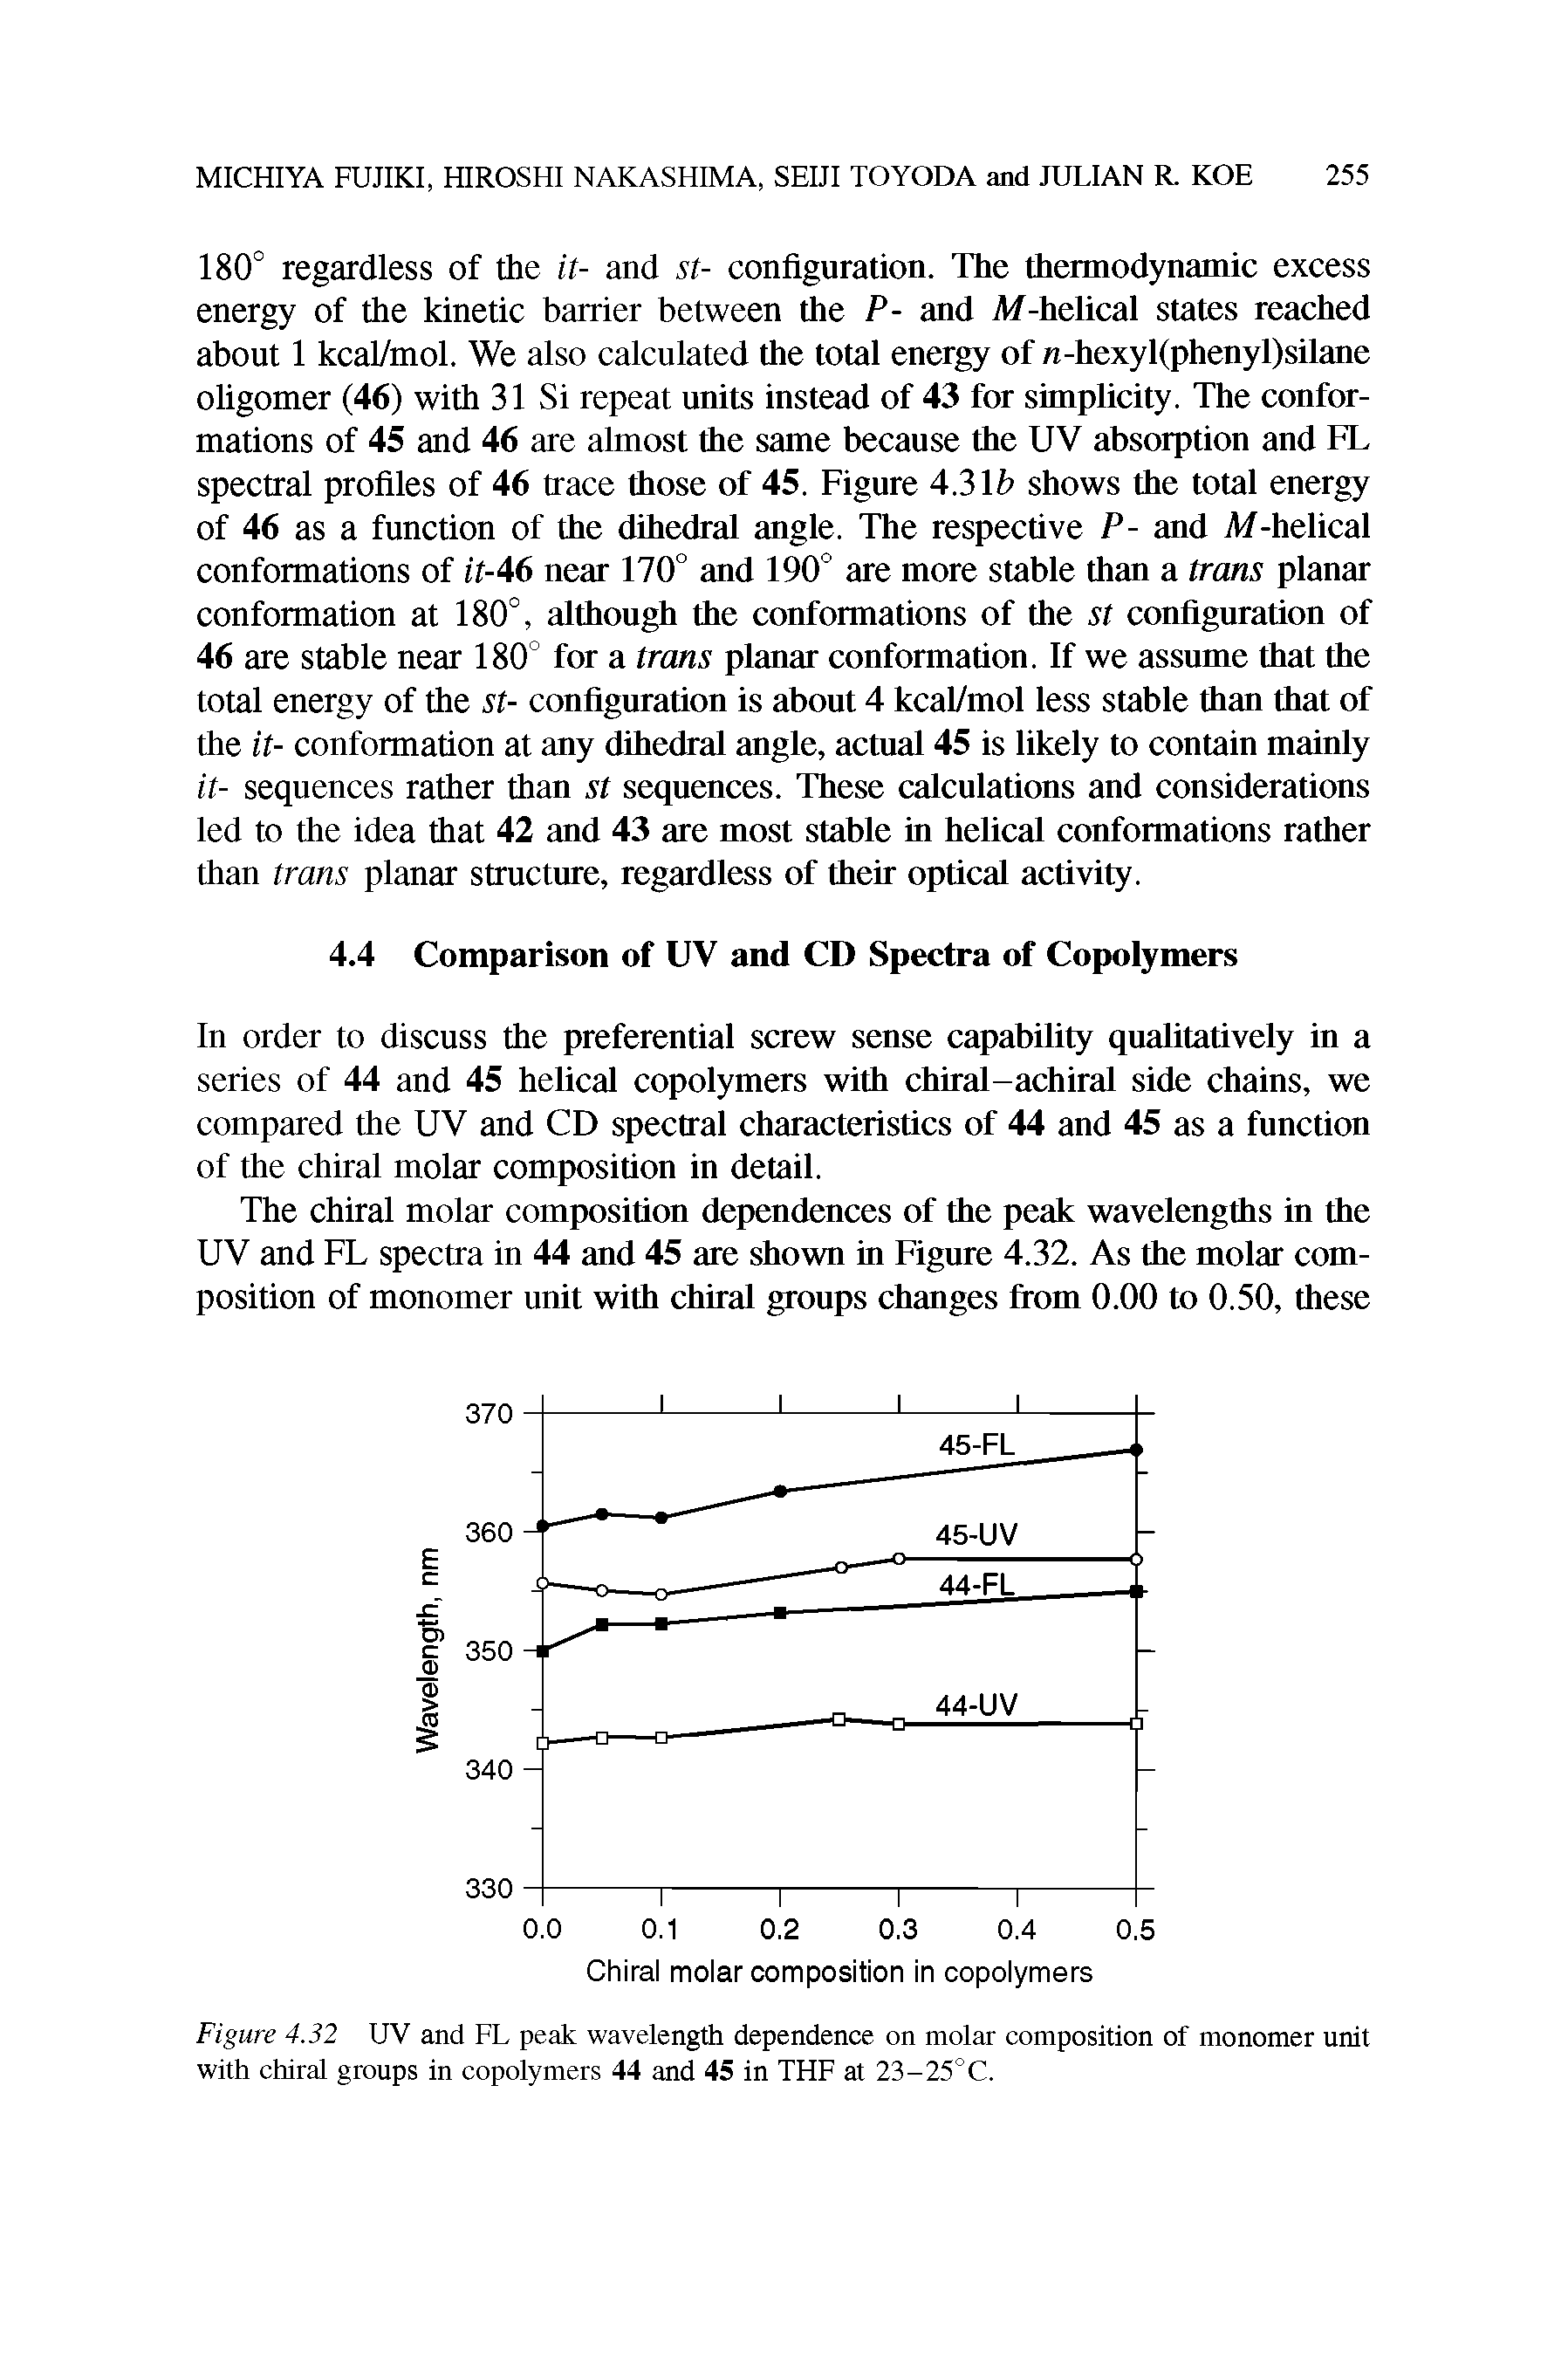 Figure 432 UV and FL peak wavelength dependence on molar composition of monomer unit with chiral groups in copolymers 44 and 45 in THF at 23-25°C.